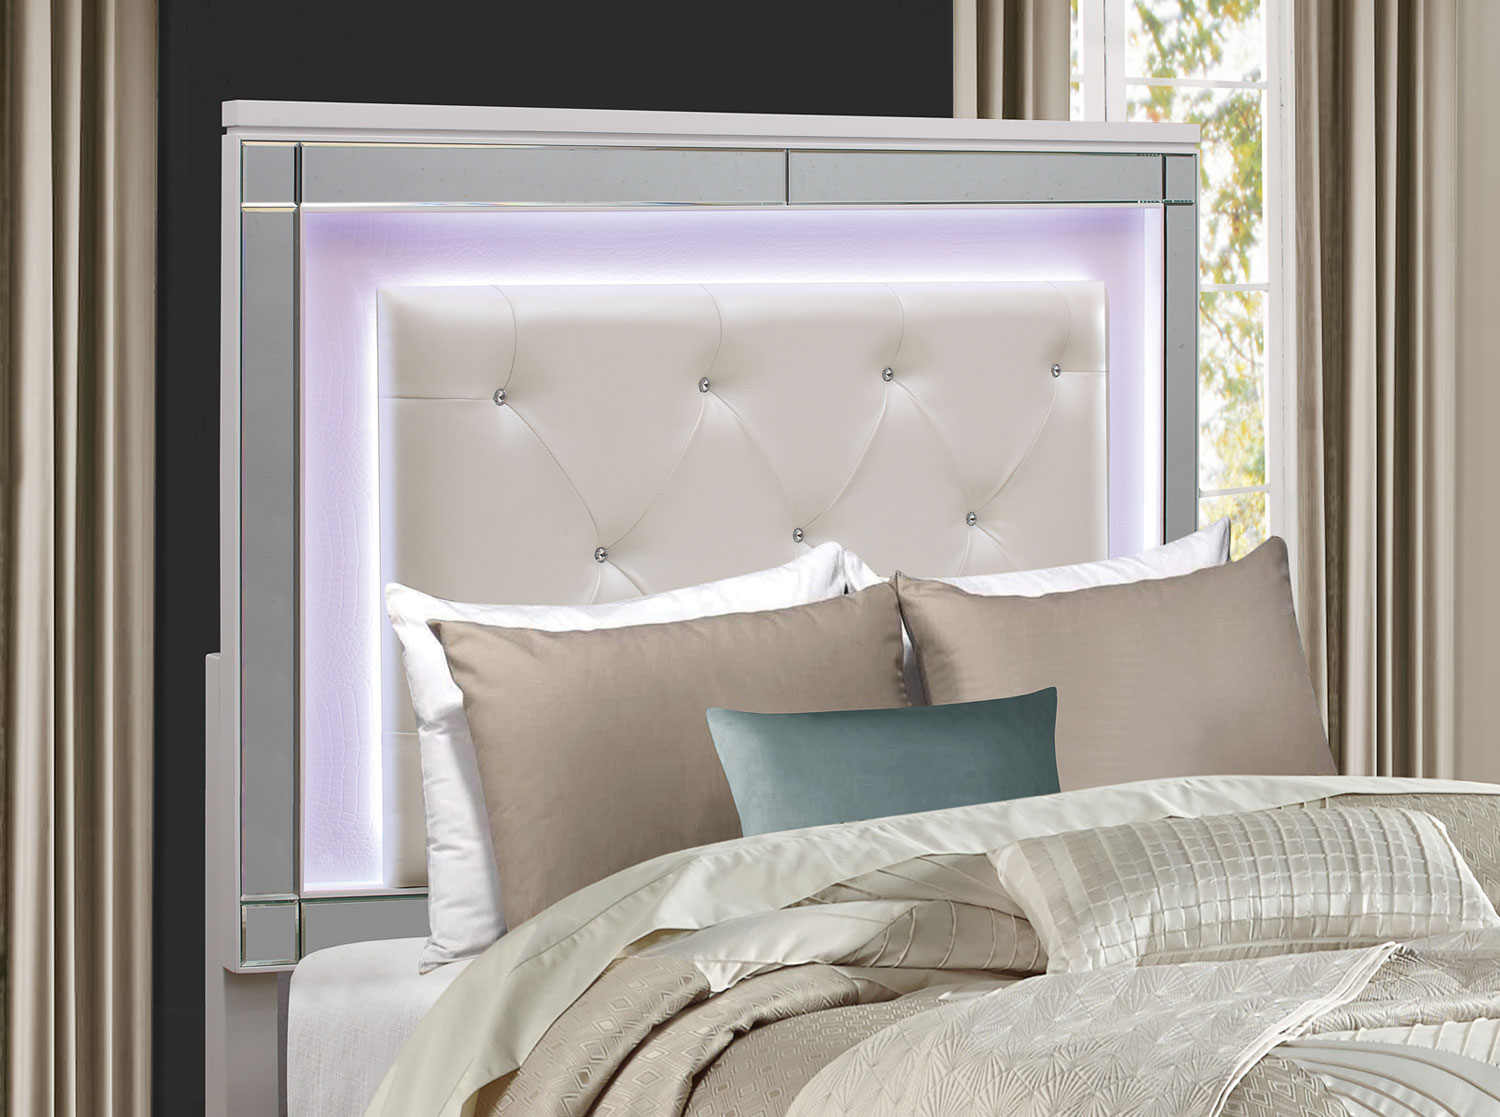 Homelegance Alonza Bed with LED Lighting - Brilliant White